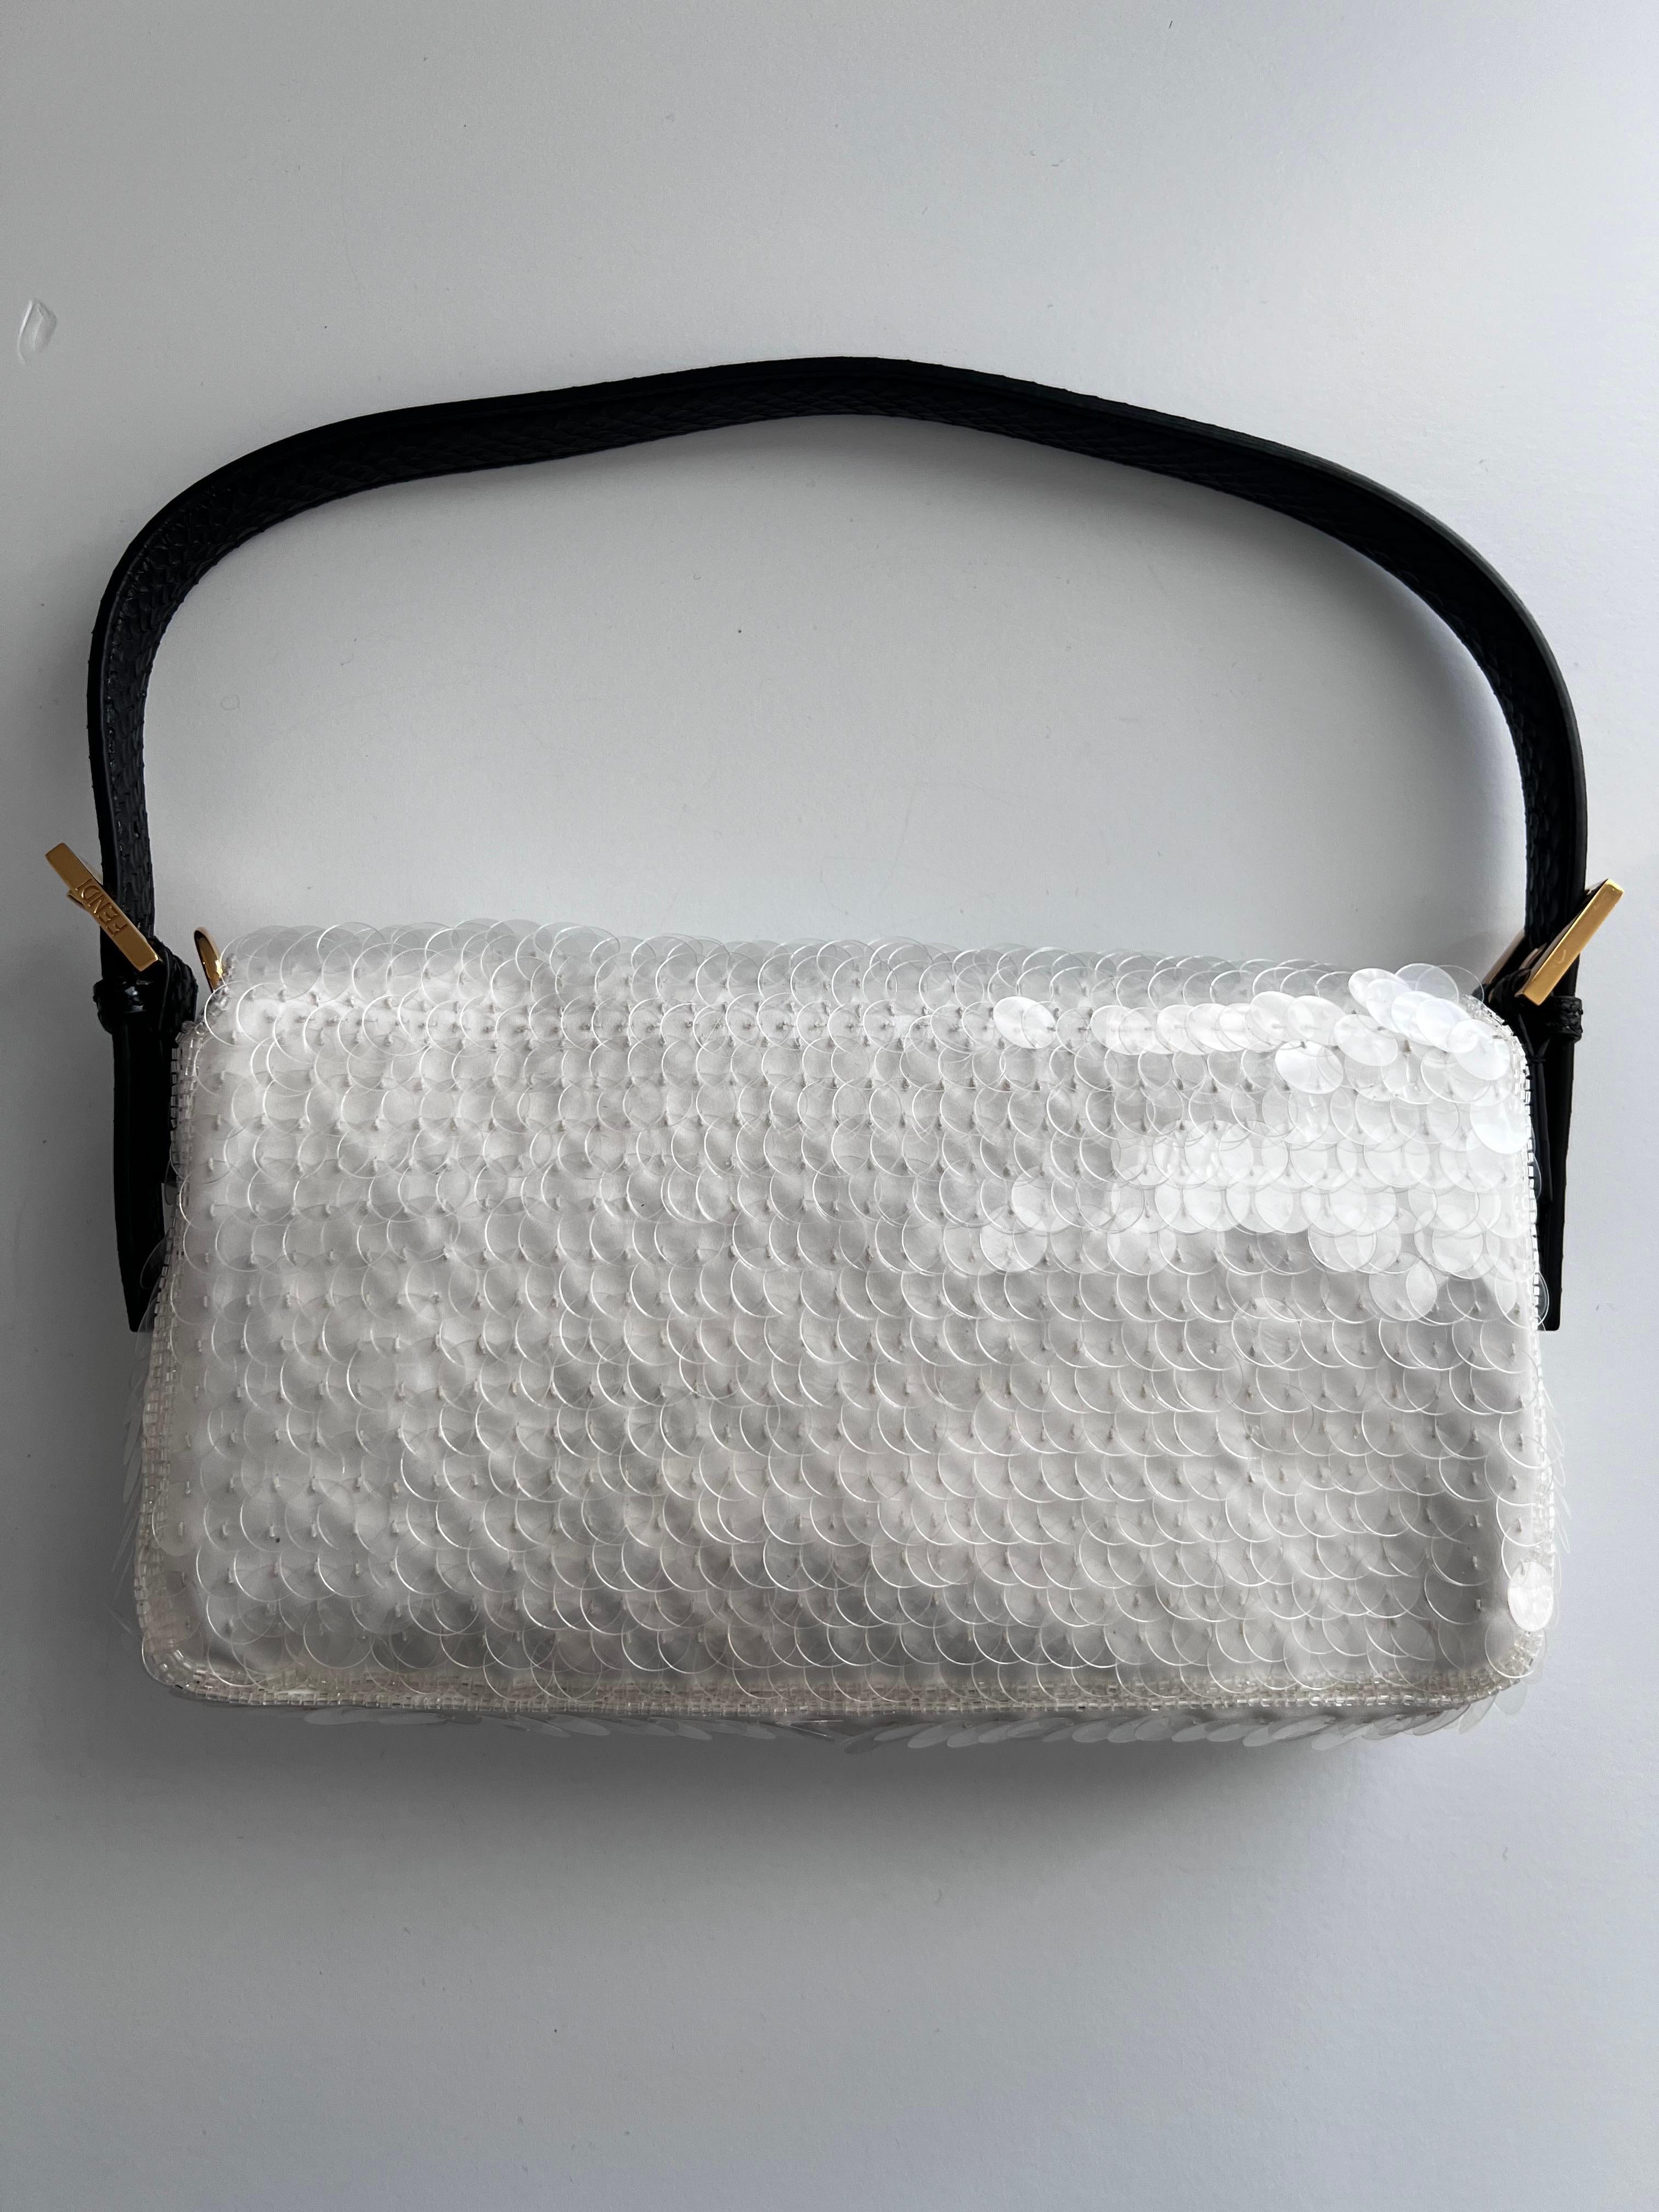 Very rare white sequin FENDI baguette
A classic and timeless piece
Very good condition
No noticeable stains or flaws
Clean interior and exterior 
